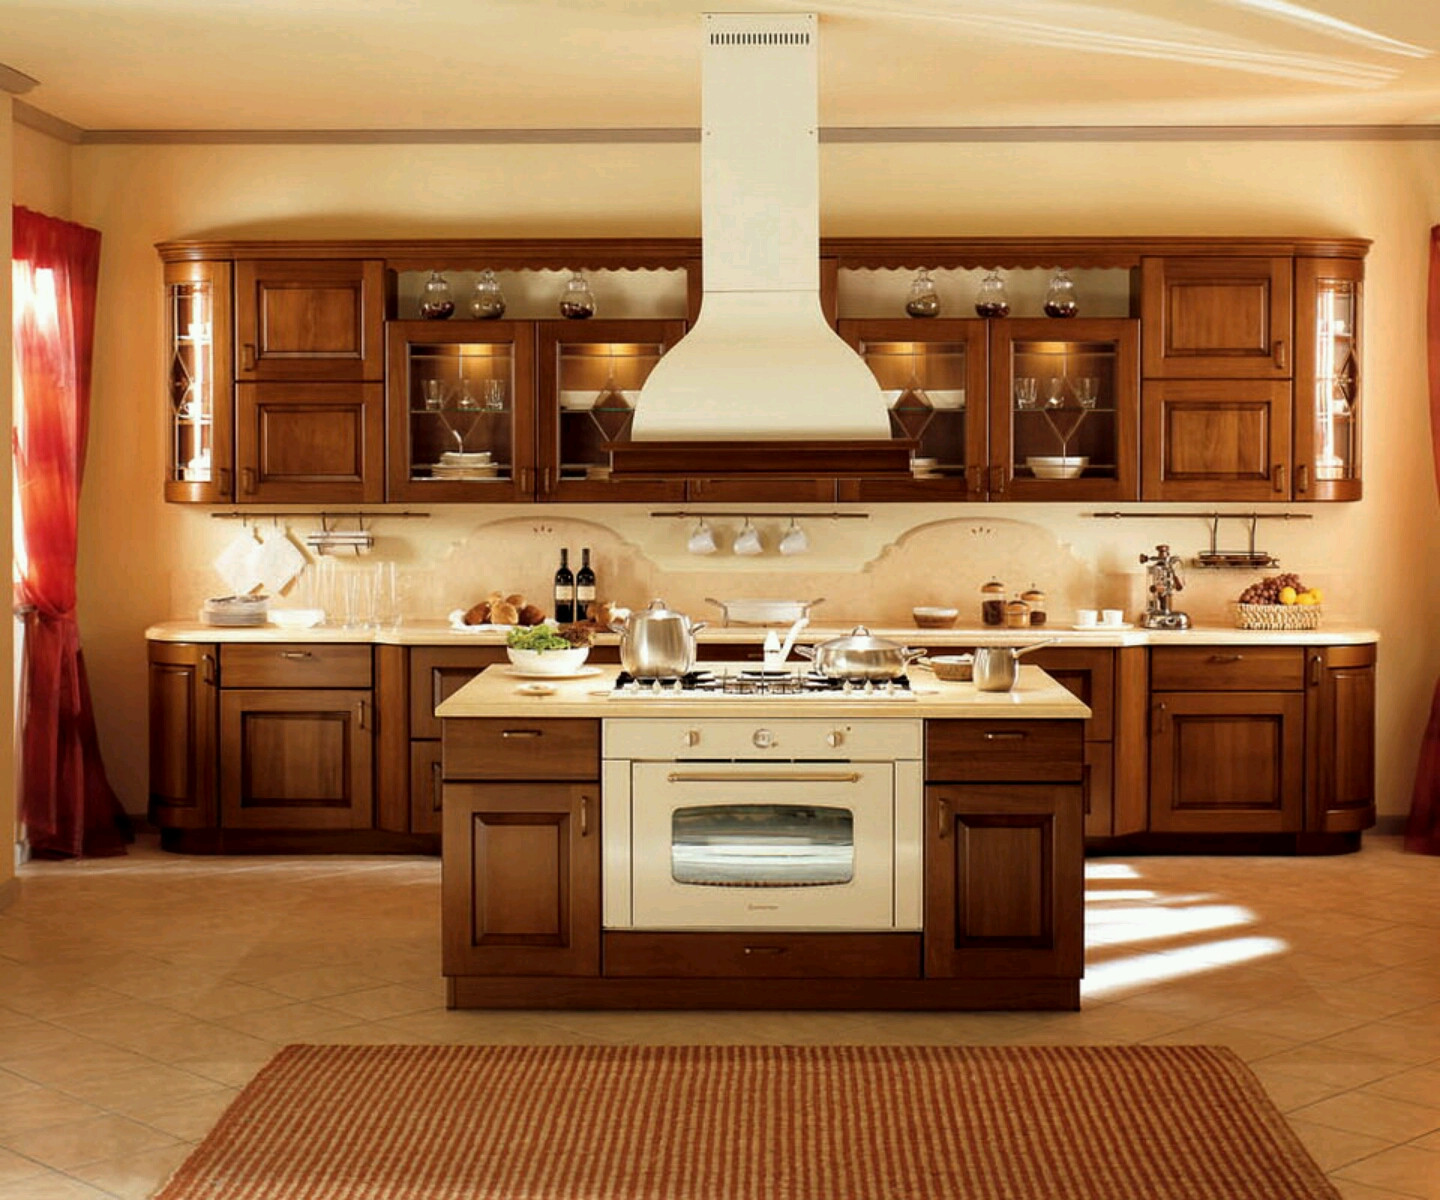 Kitchen Cabinets Remodel Ideas
 New home designs latest Modern kitchen cabinets designs